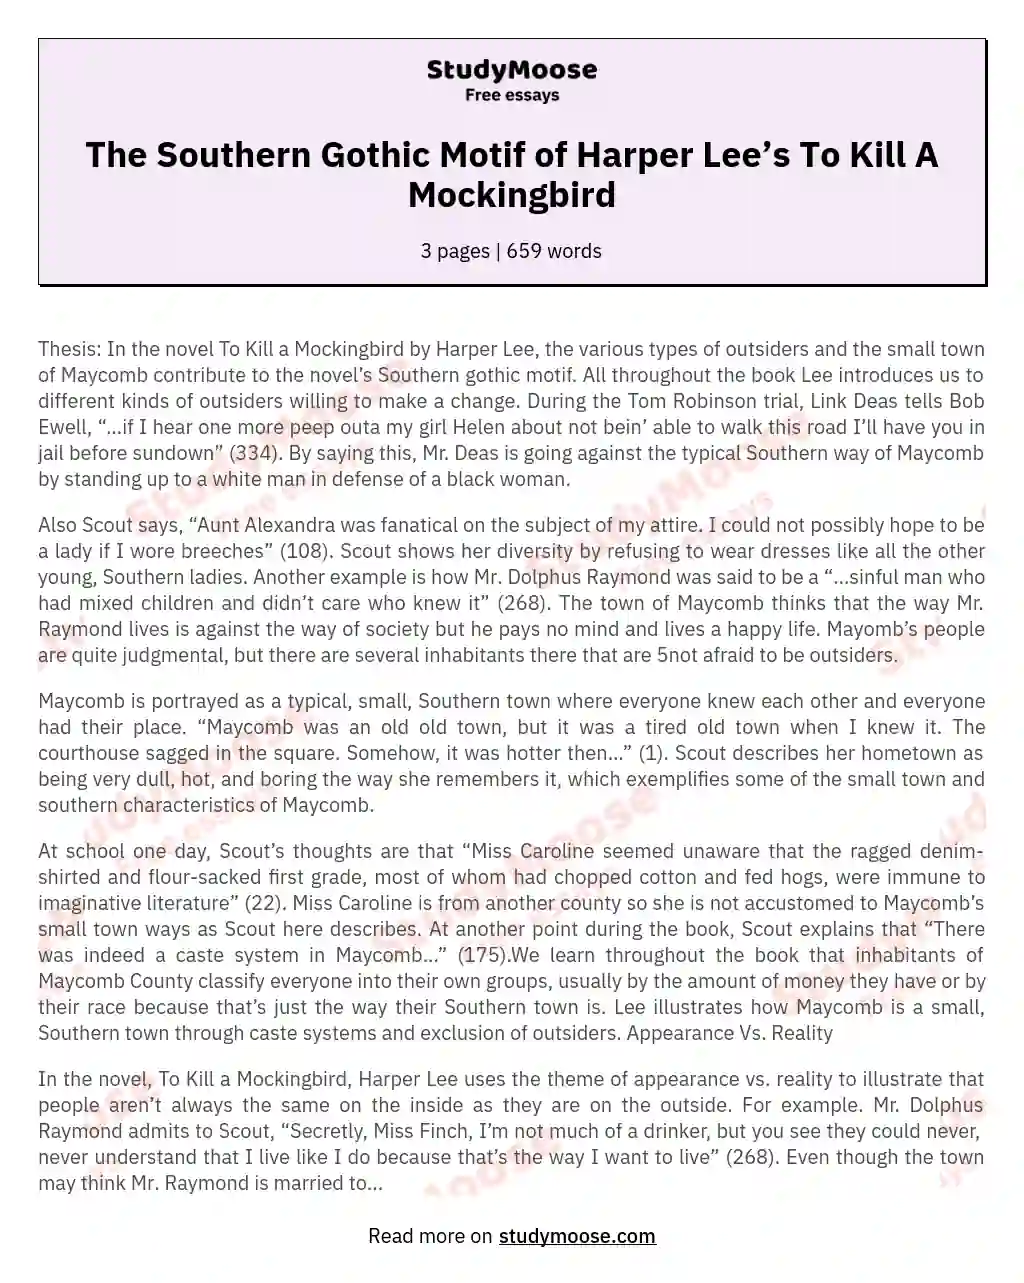 The Southern Gothic Motif of Harper Lee’s To Kill A Mockingbird essay